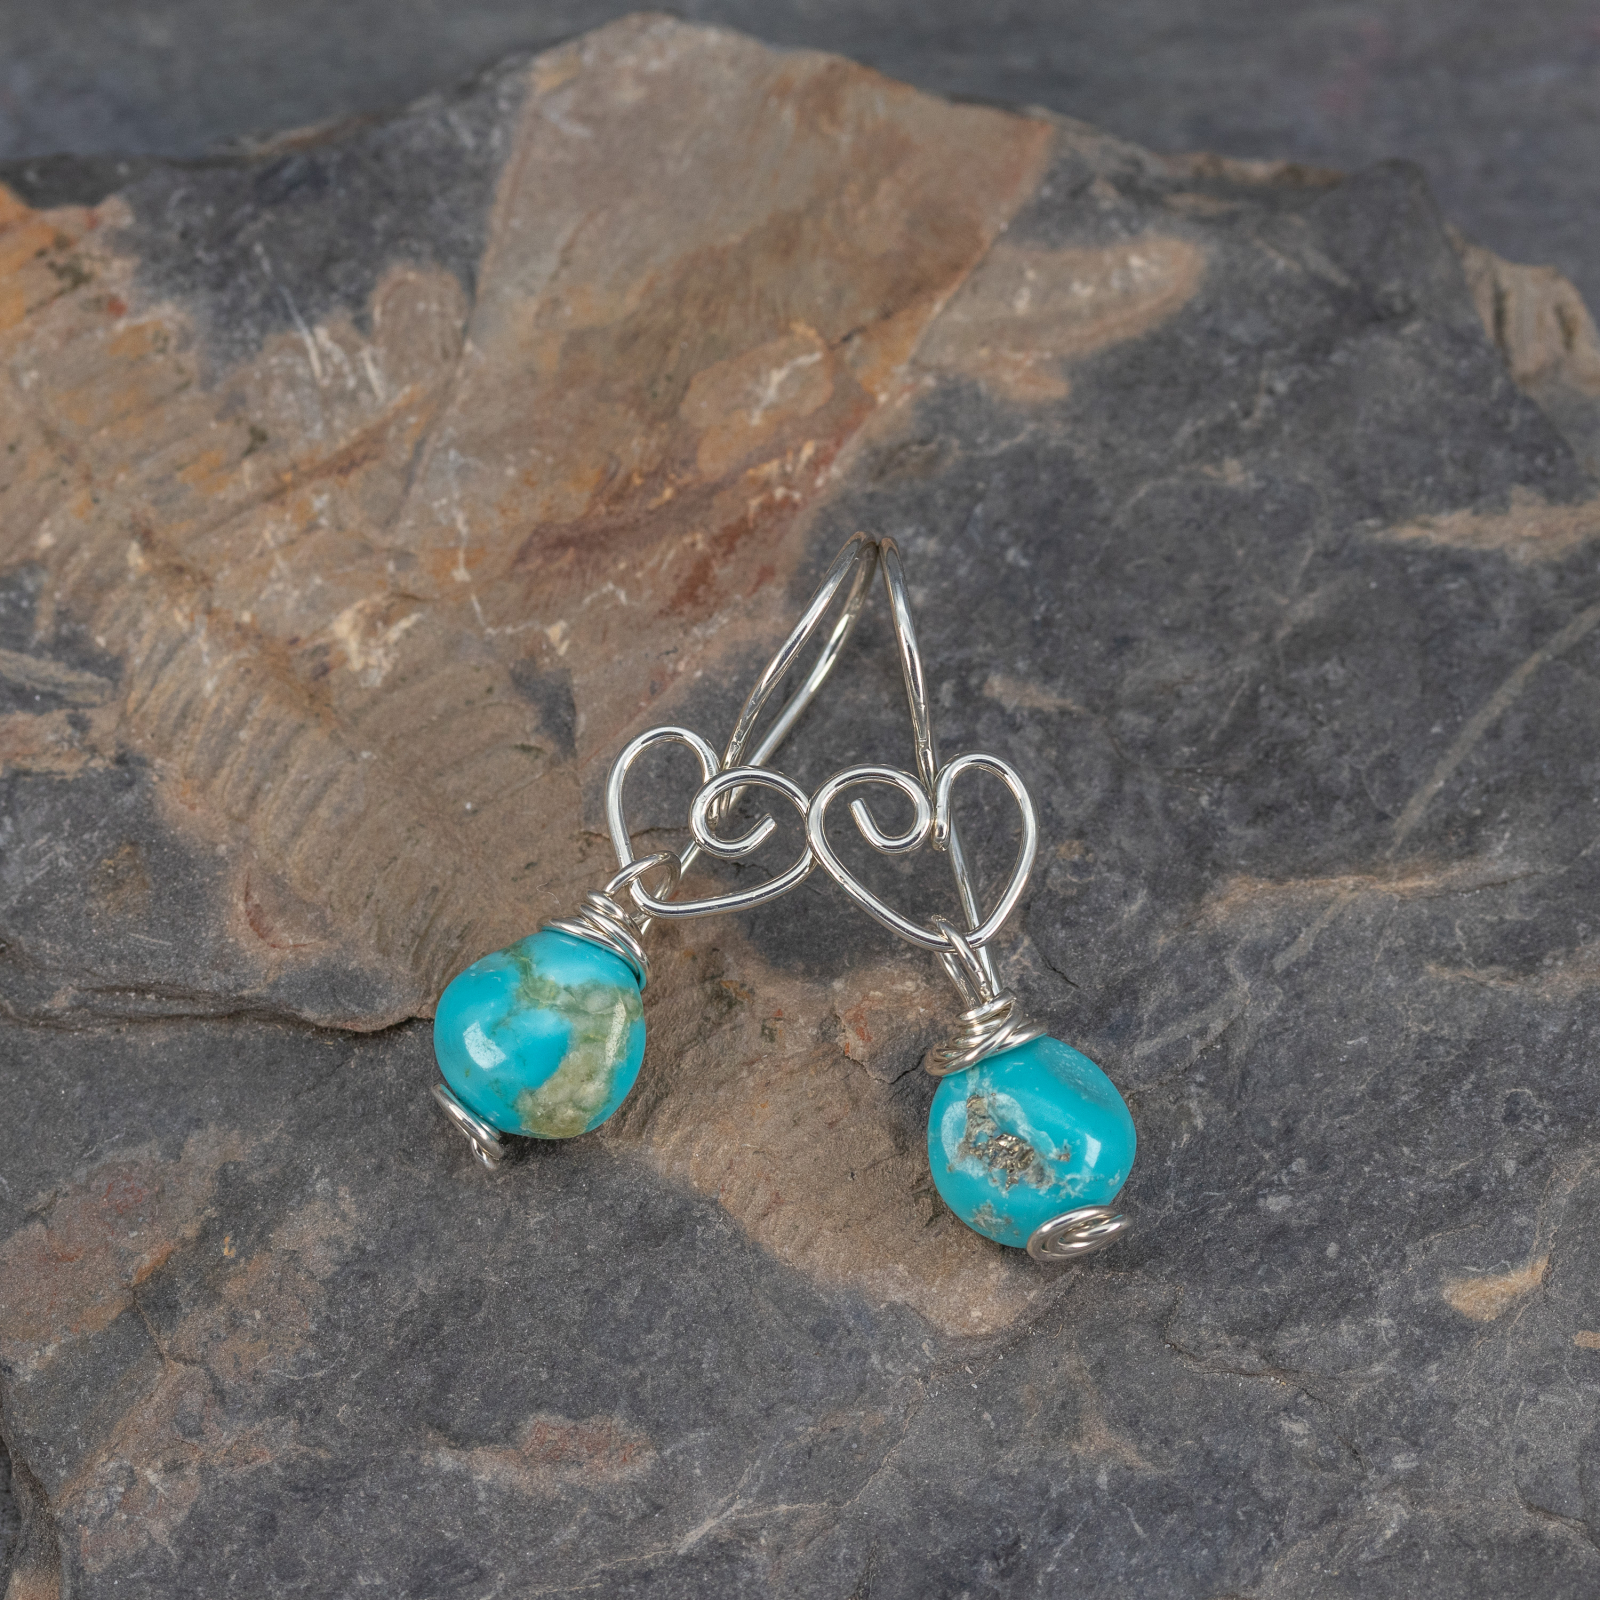 Barse Sterling Silver and Genuine Turquoise Drop Earrings | Dillard's